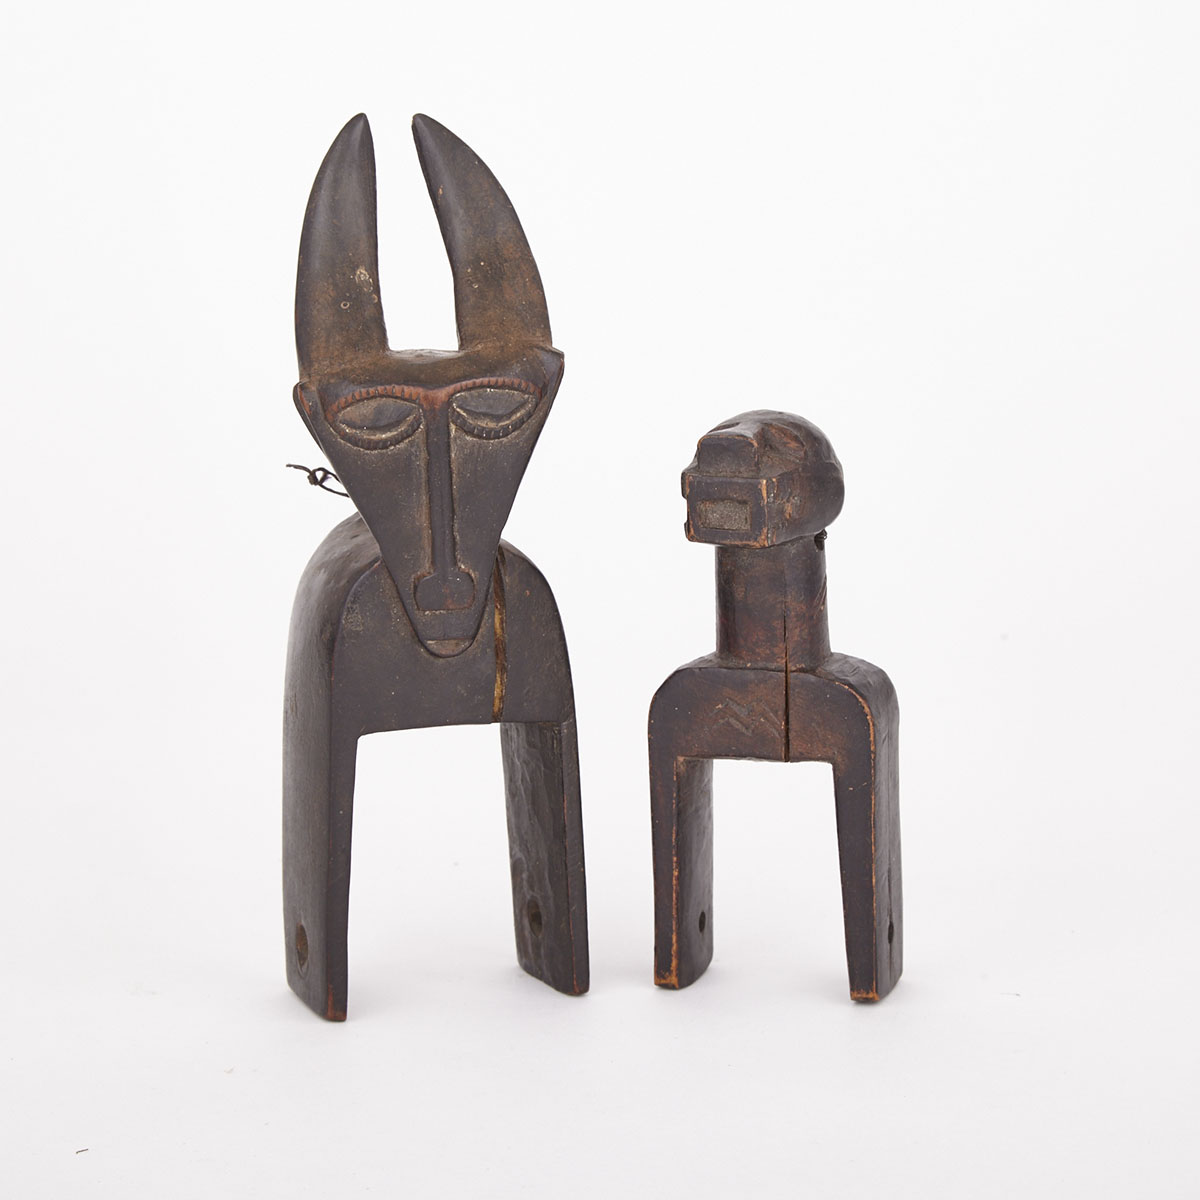 Baule Carved Wood Antelope Heddle Pulley together with a Zoomorphic Carved Wood Heddle Pulley, former West Africa, latter Africa, both 20th century 